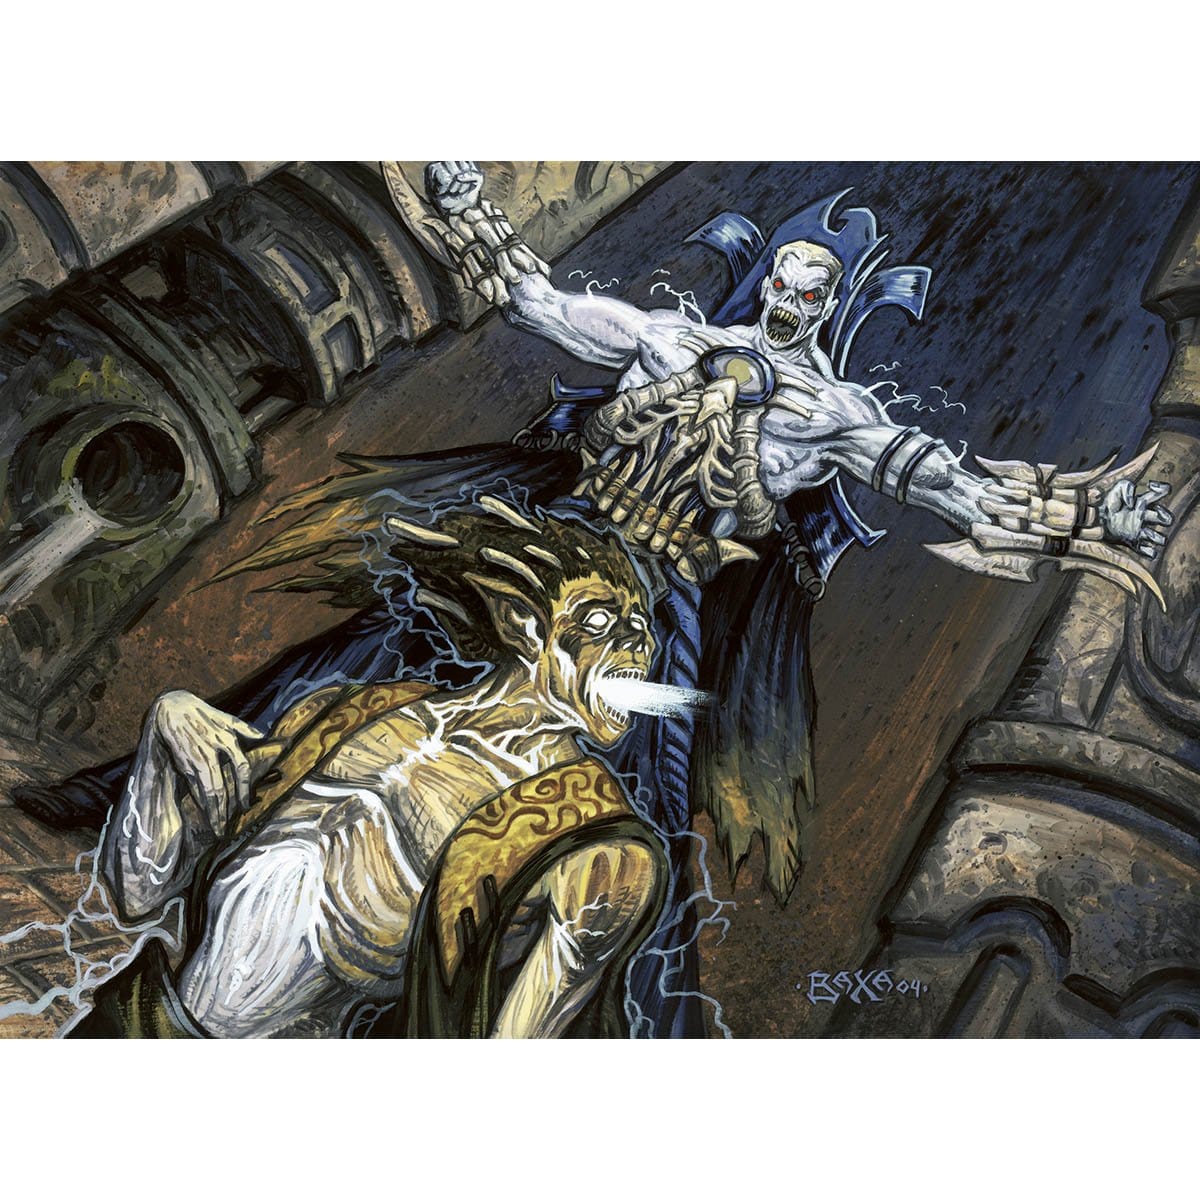 Last Gasp Print - Print - Original Magic Art - Accessories for Magic the Gathering and other card games